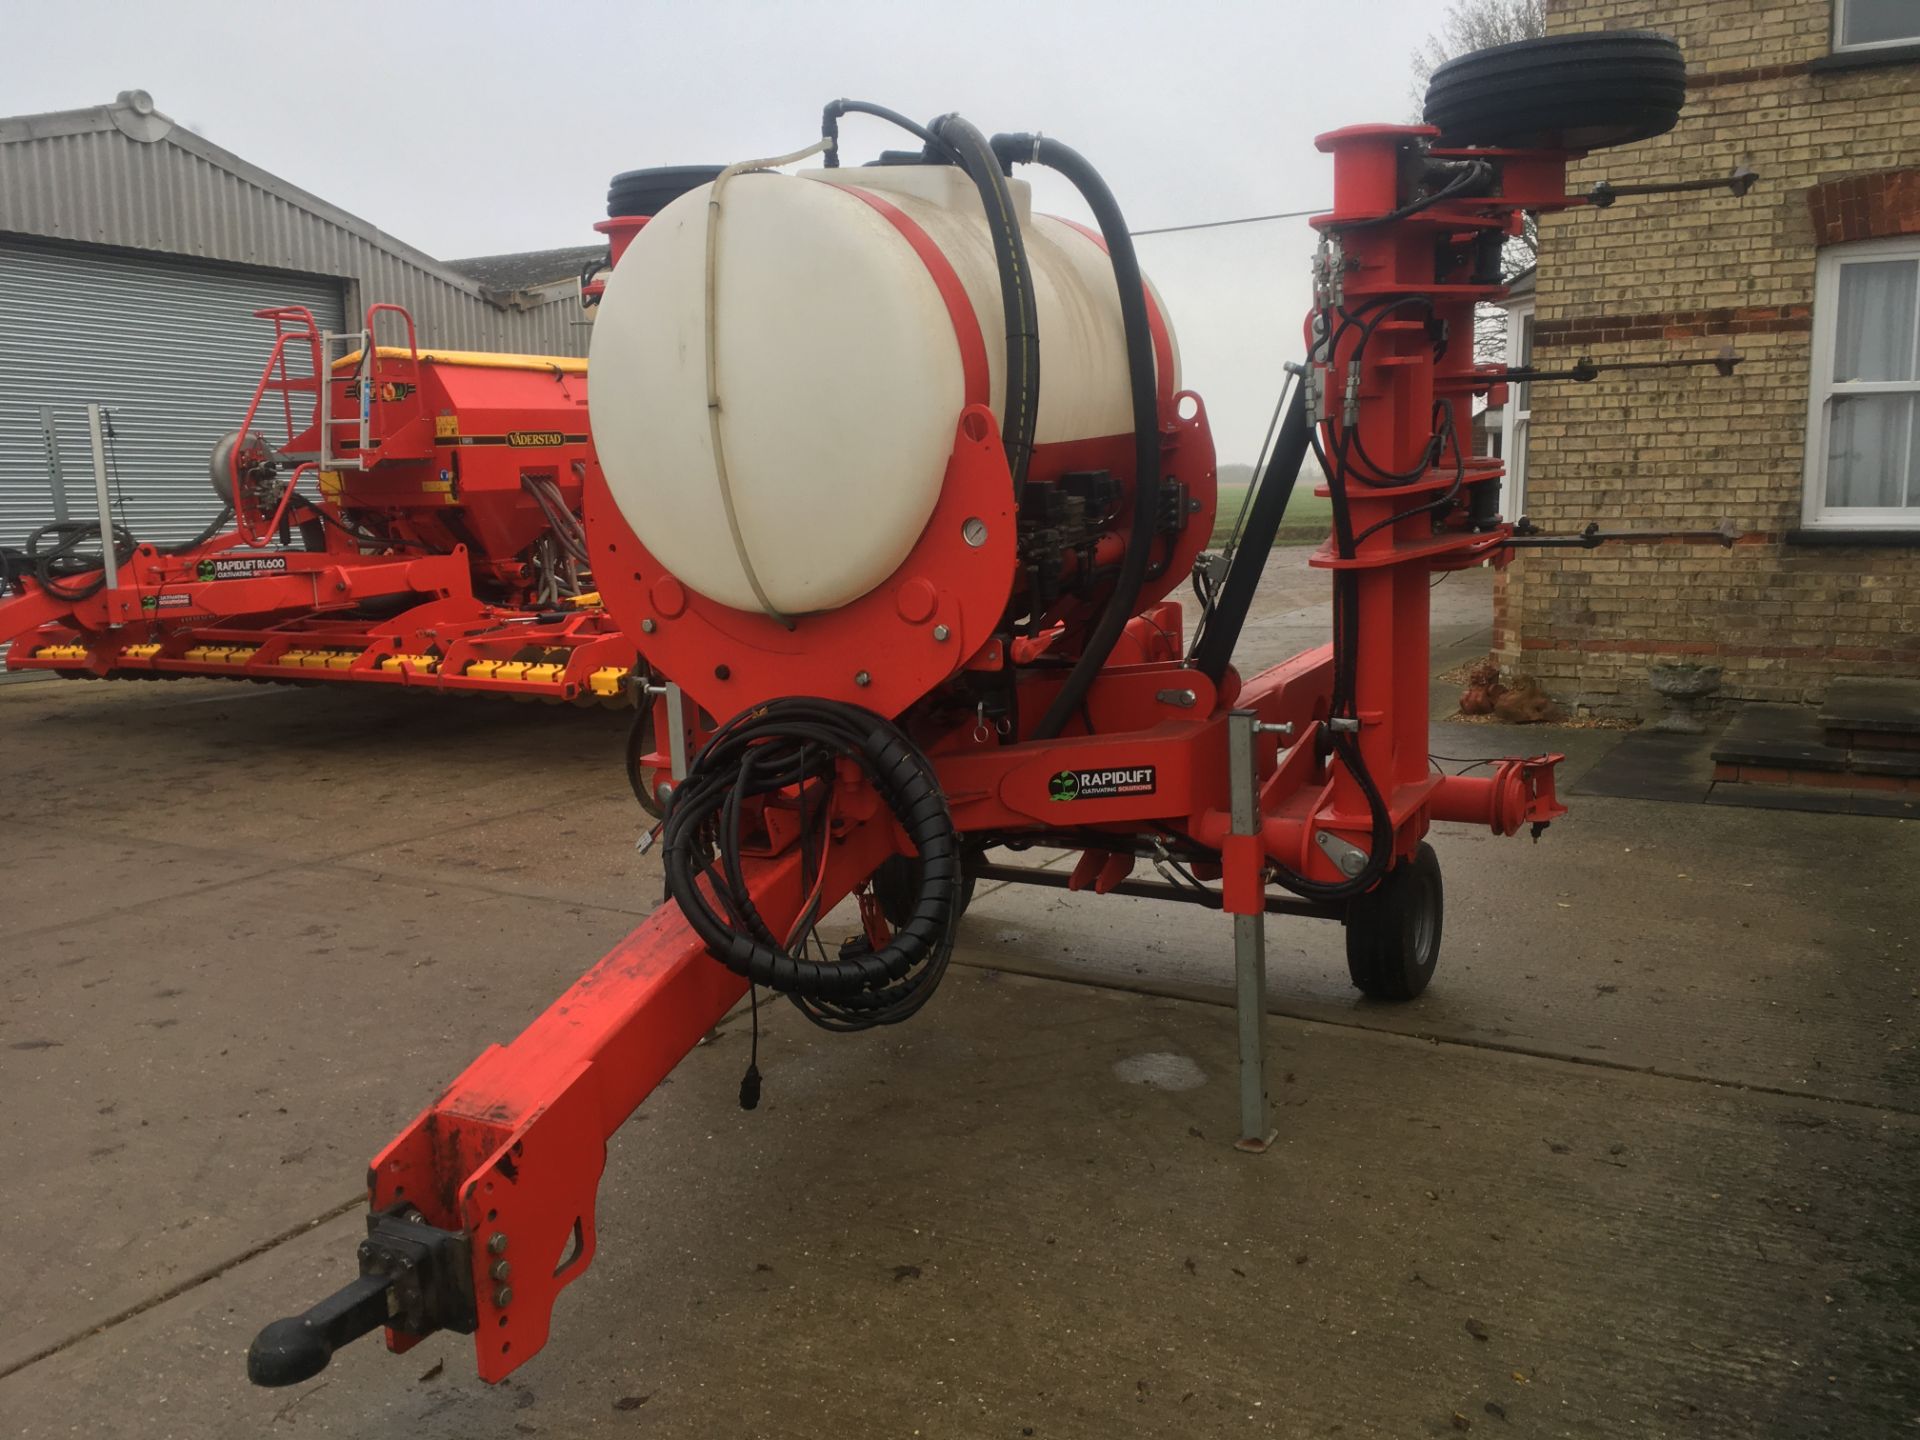 Vaderstad Rapid A600S Drill (07), Serial No. 14277, Location - Sandy, Bedfordshire - Image 11 of 11